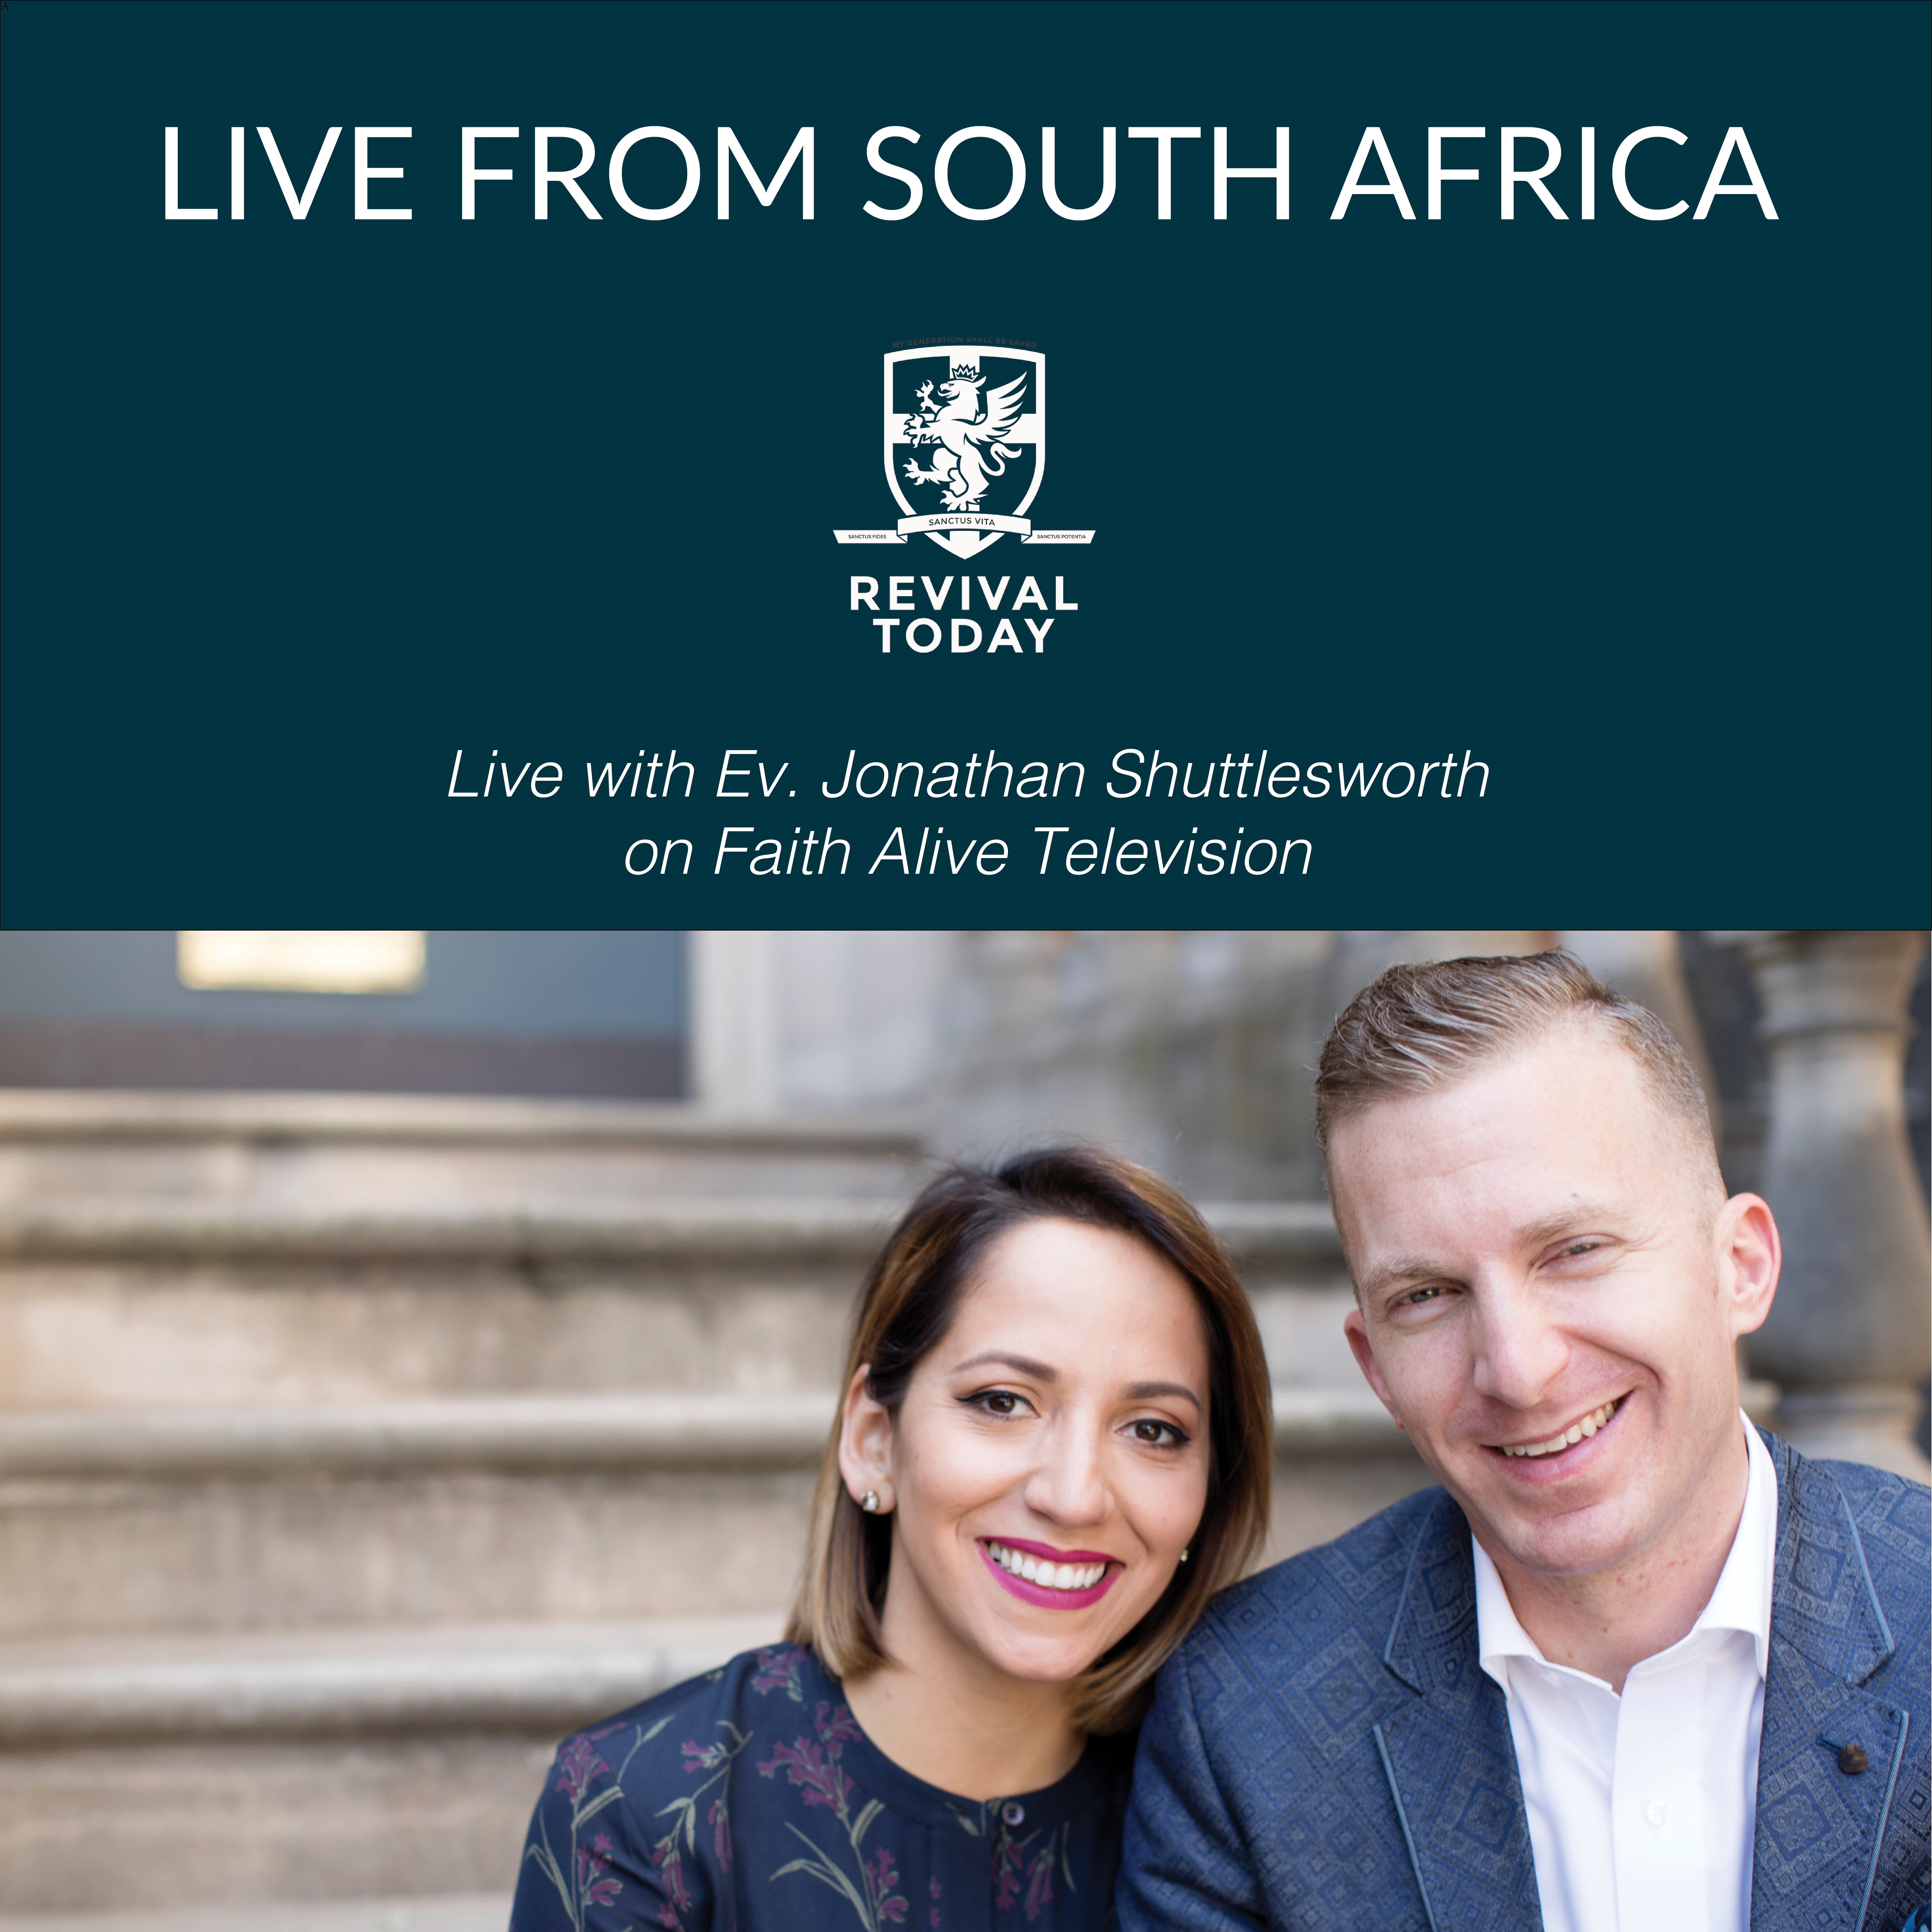 Jonathan Shuttlesworth Preaching in South Africa on Faith Alive Television